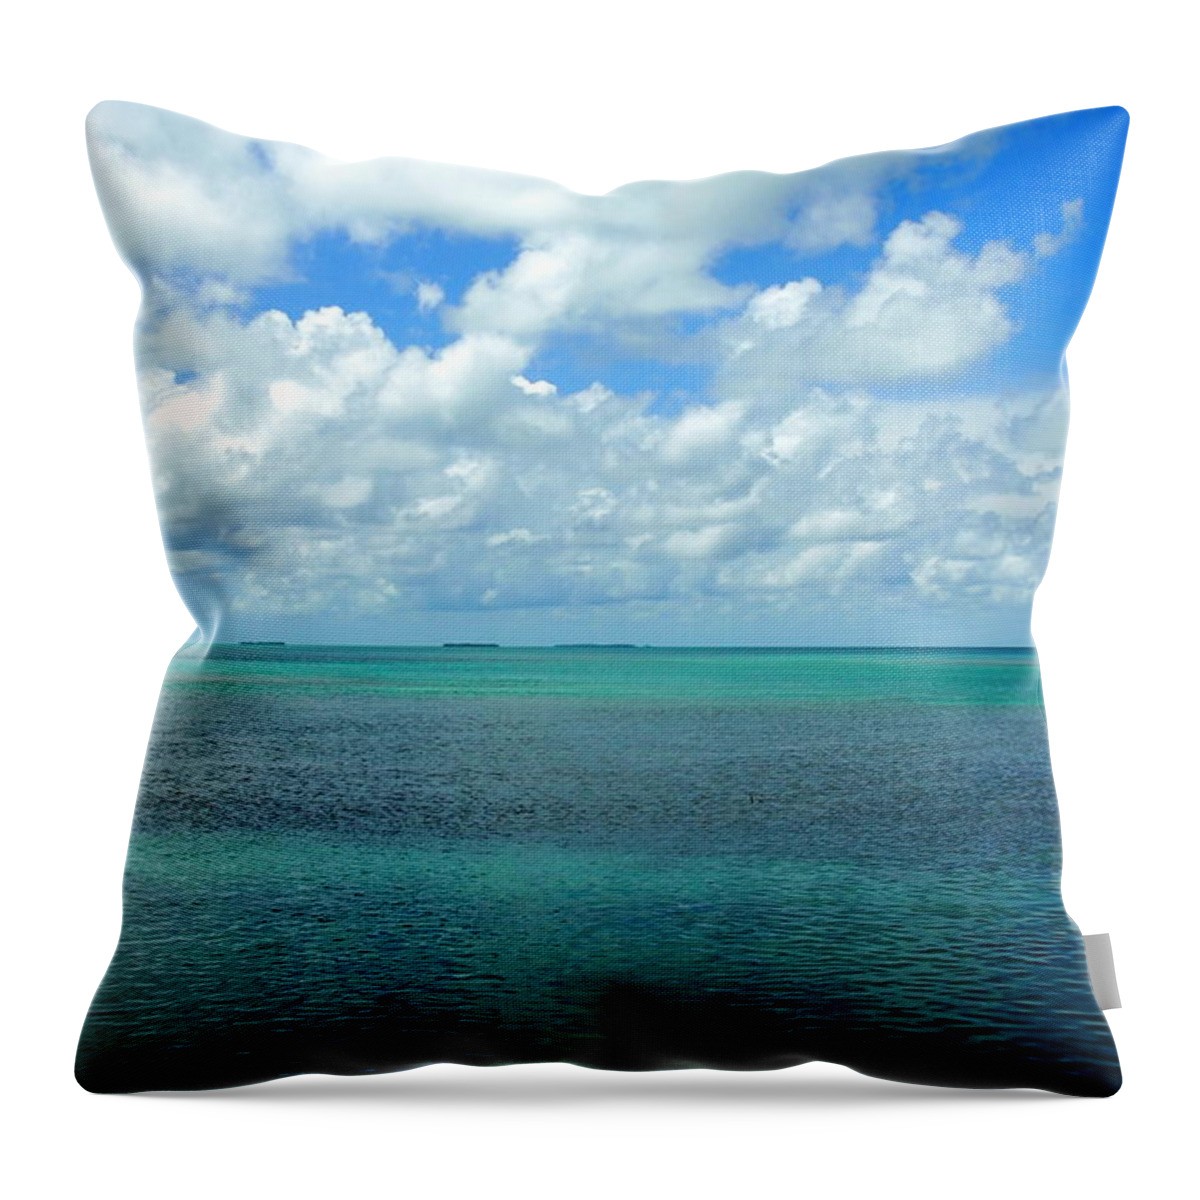 Key West Throw Pillow featuring the photograph The Florida Keys by Amy McDaniel